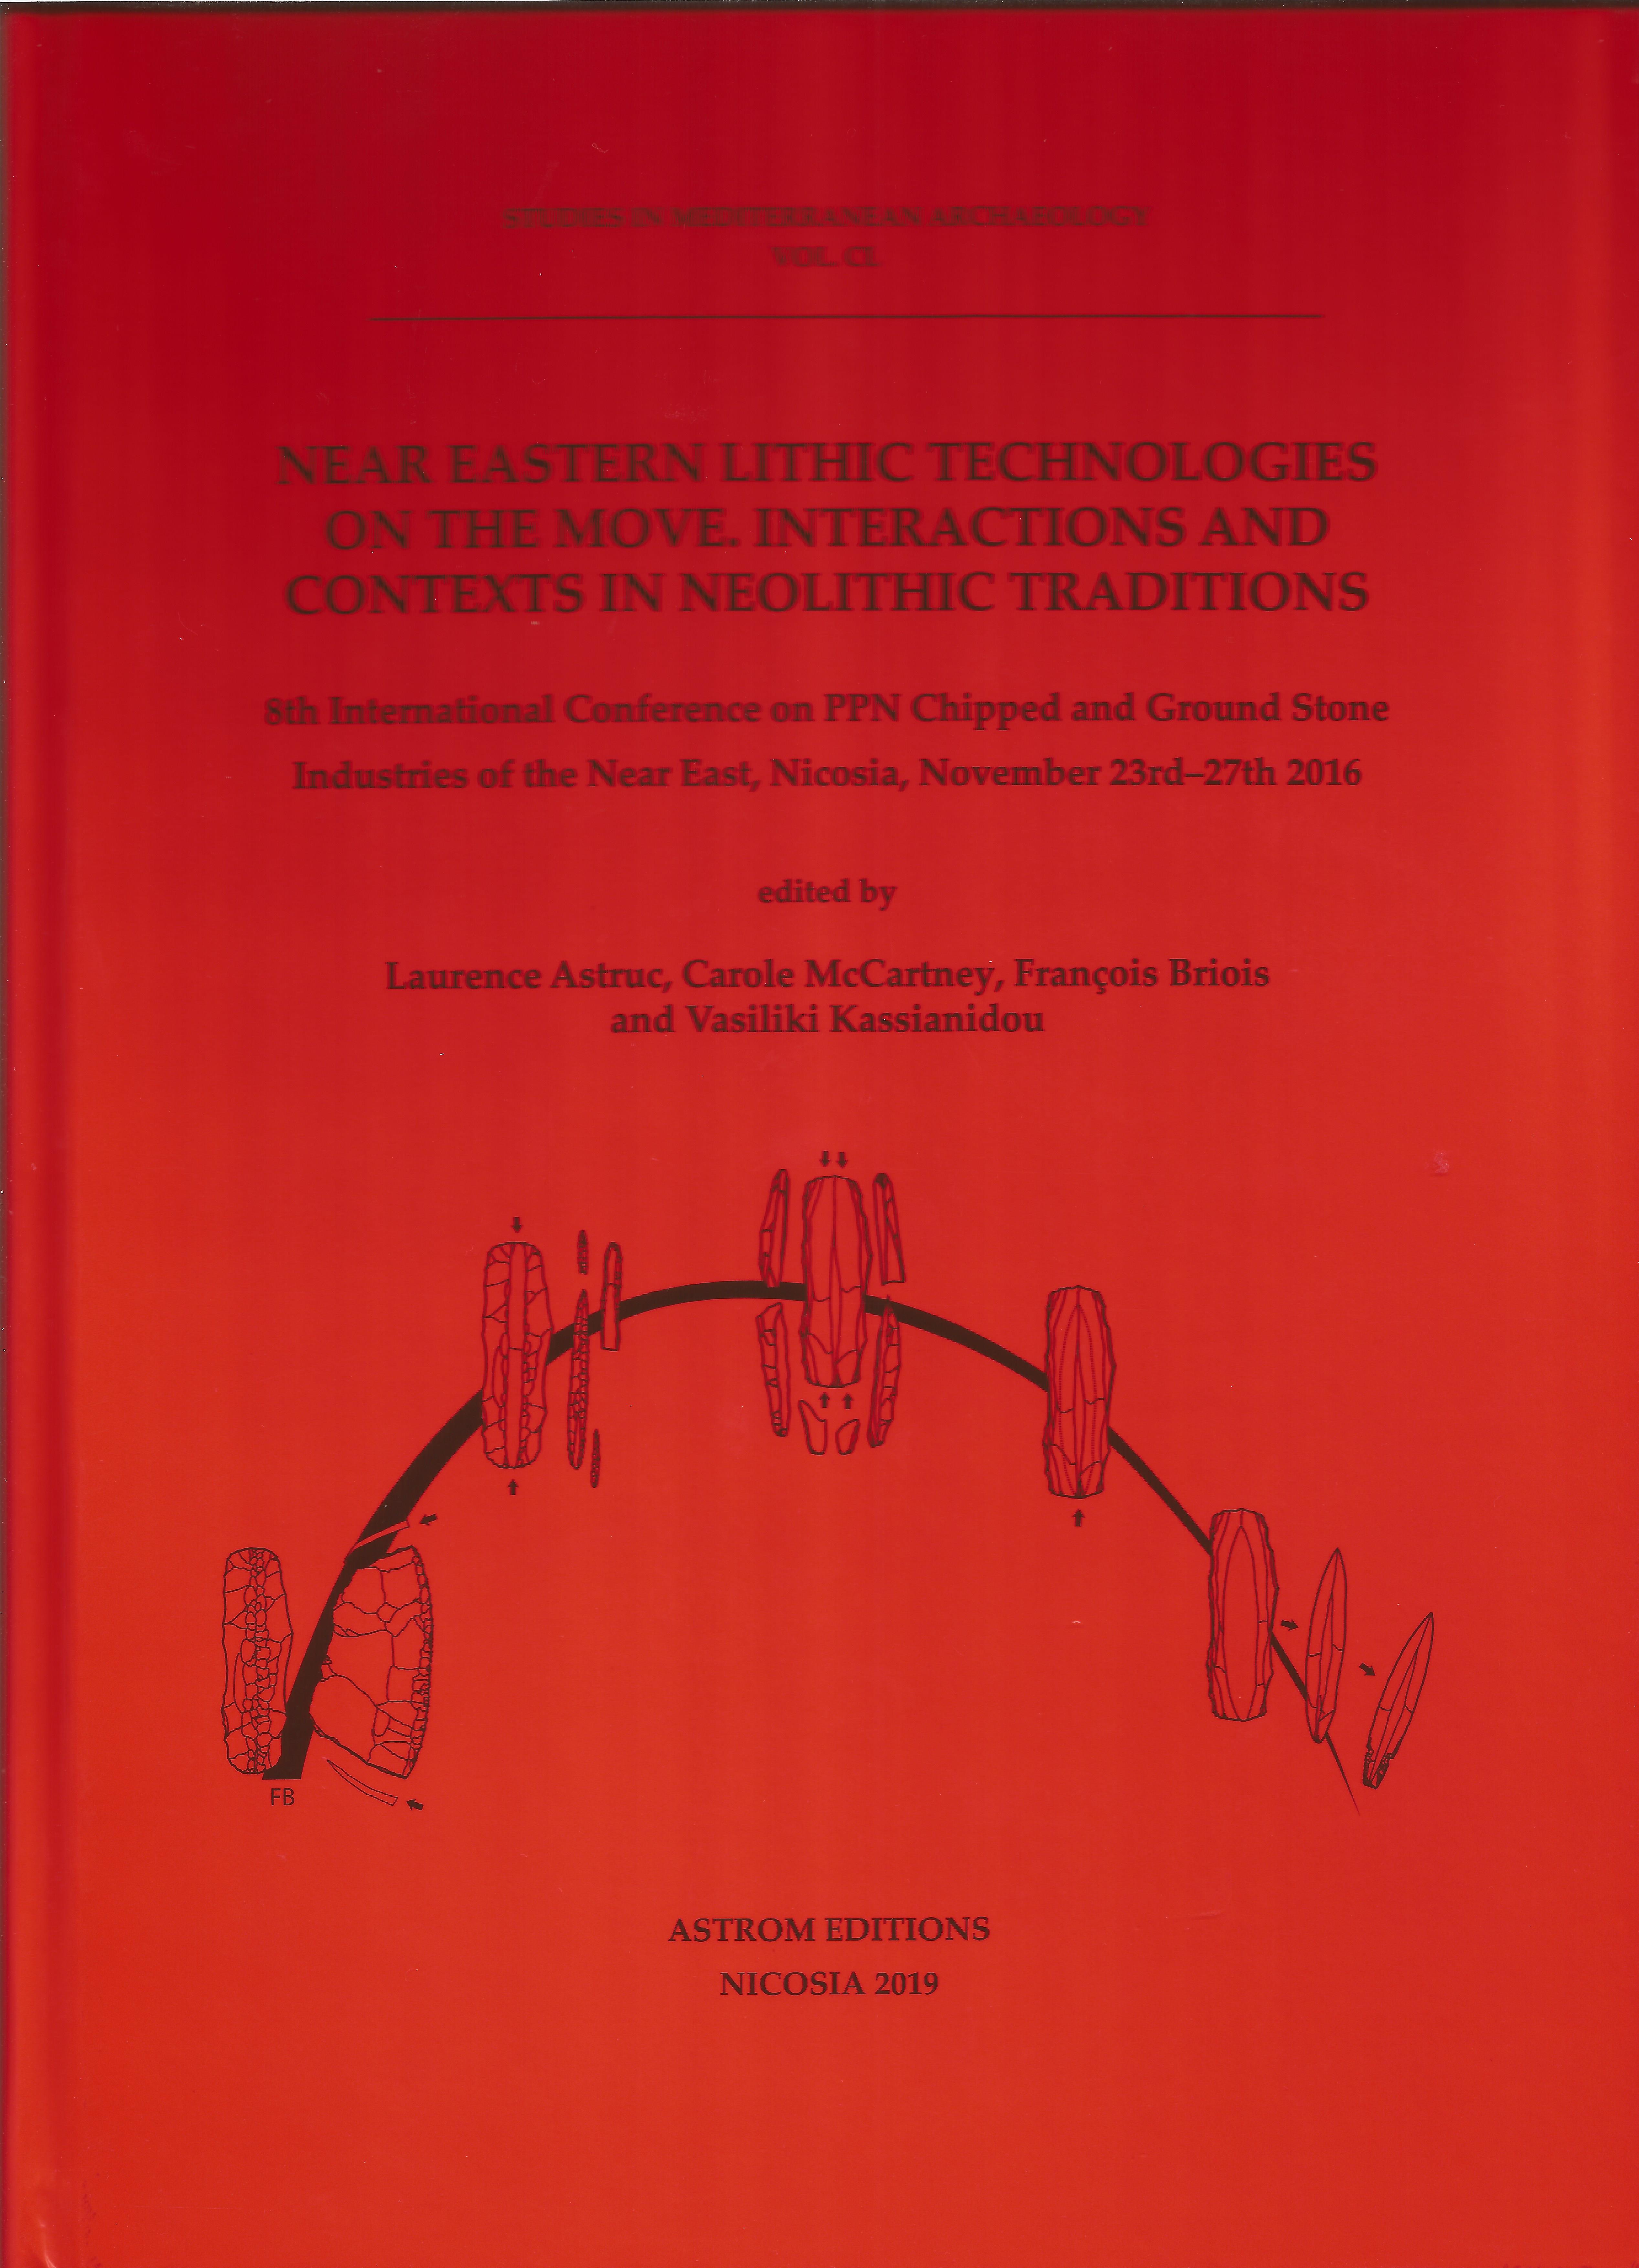 [Near Eastern Lithic Technologies on the Move. Interactions and Contexts in Neolithic Traditions.]